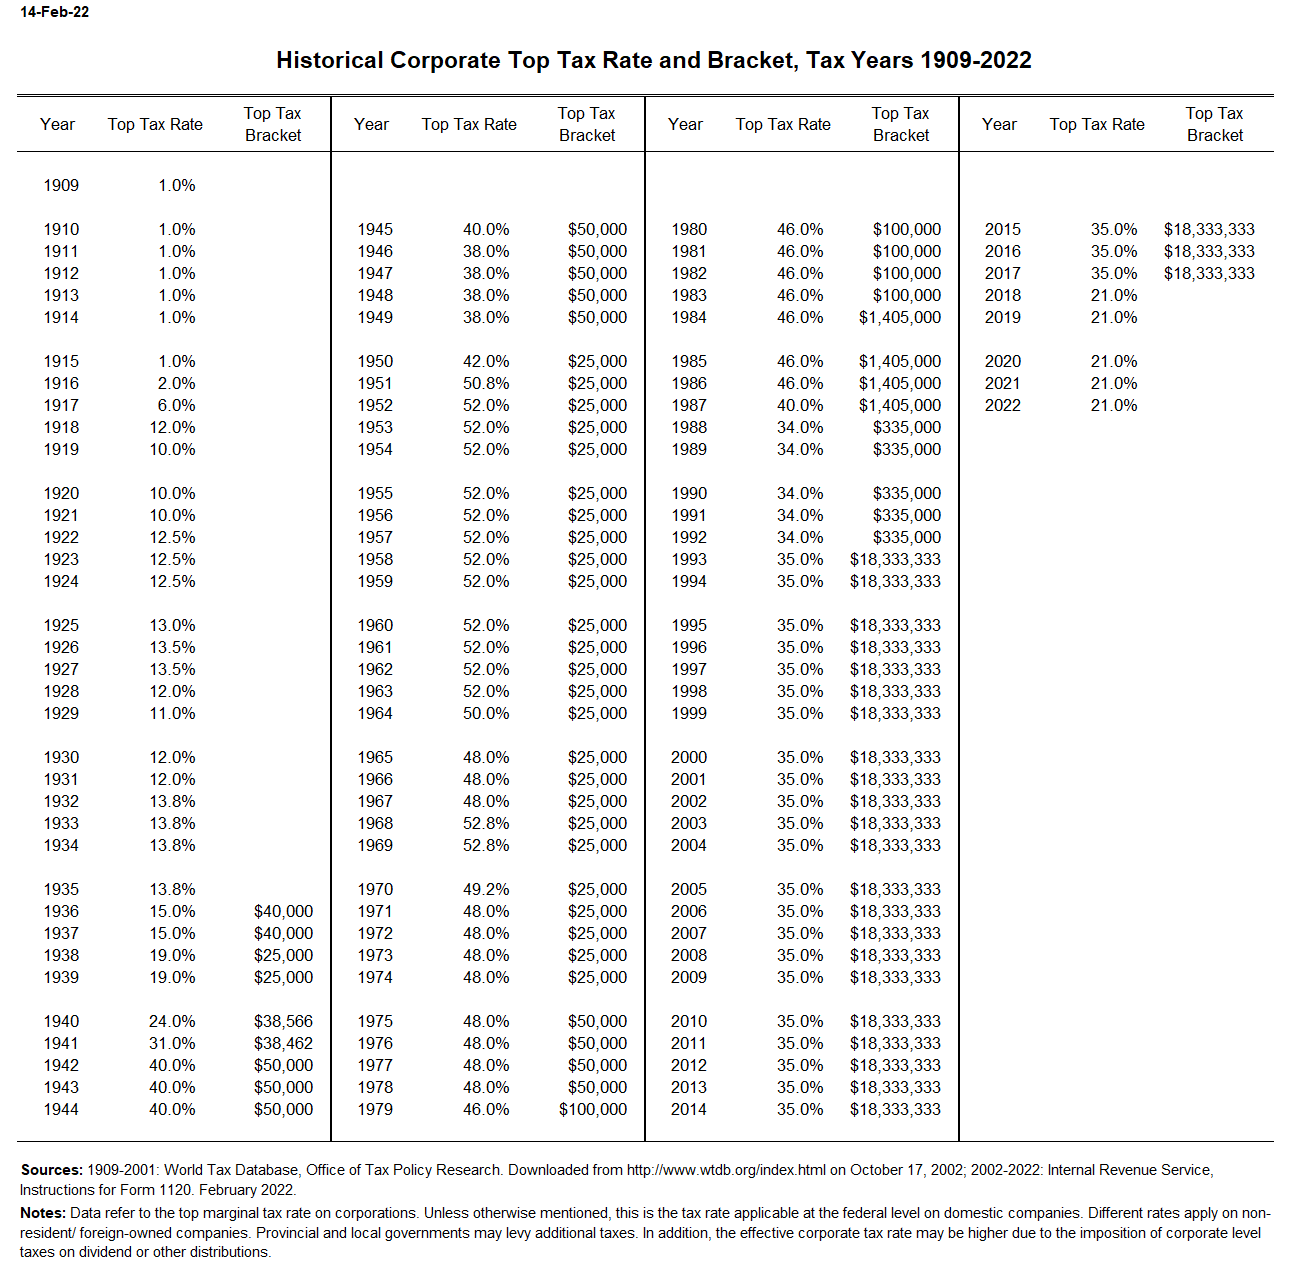 Corporate Top Tax Rate and Bracket Tax Policy Center